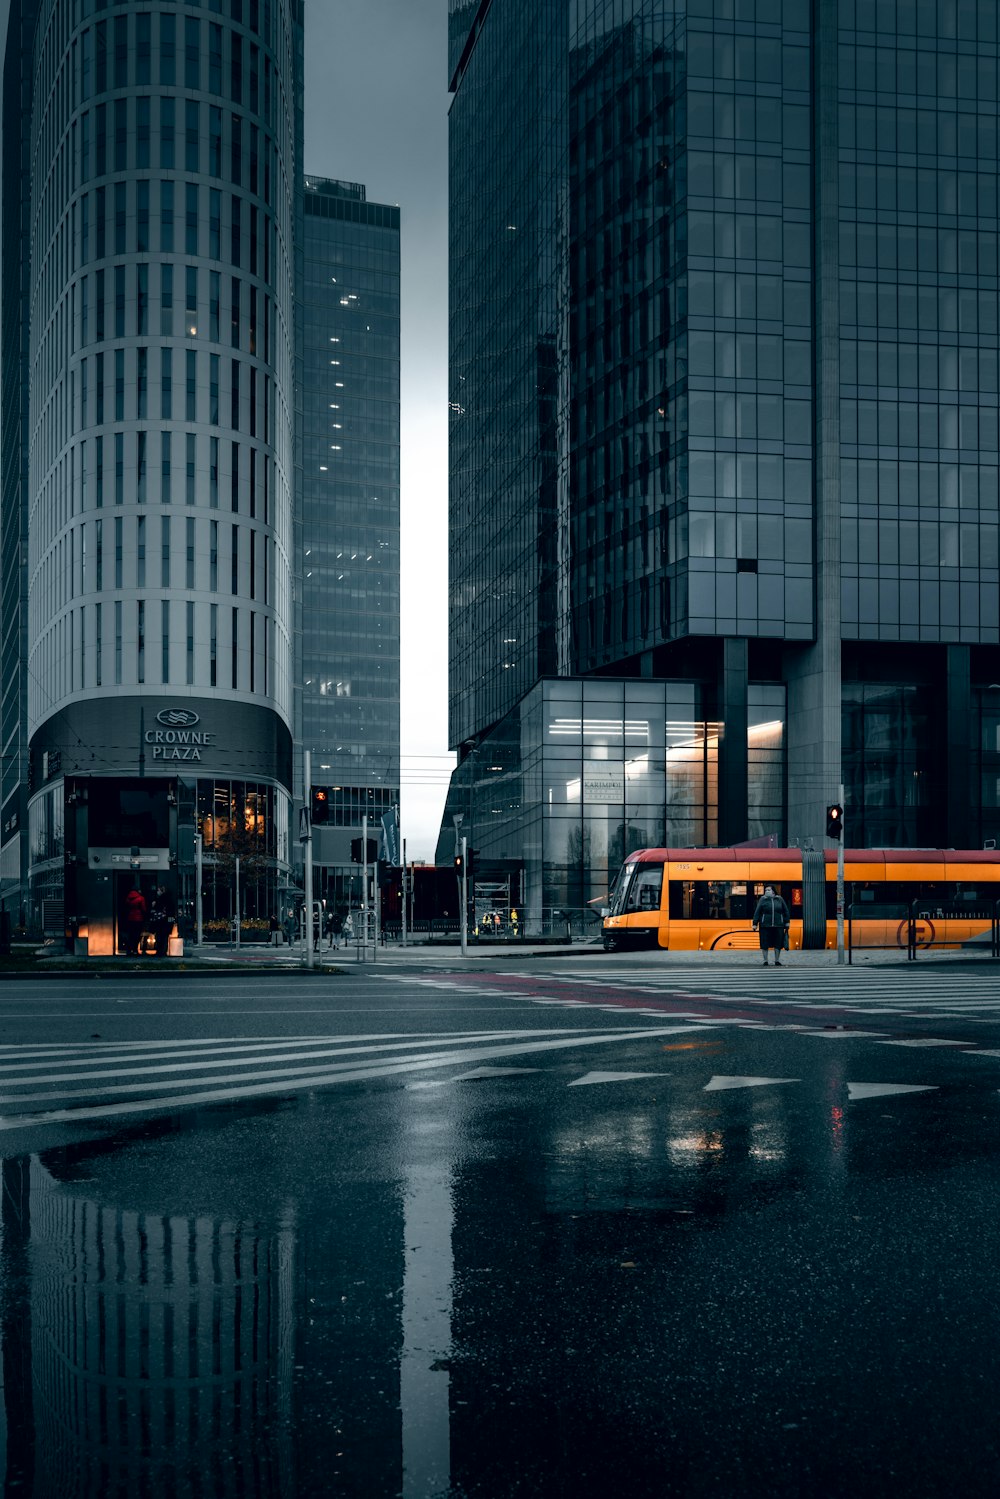 yellow bus on road near high rise buildings during daytime